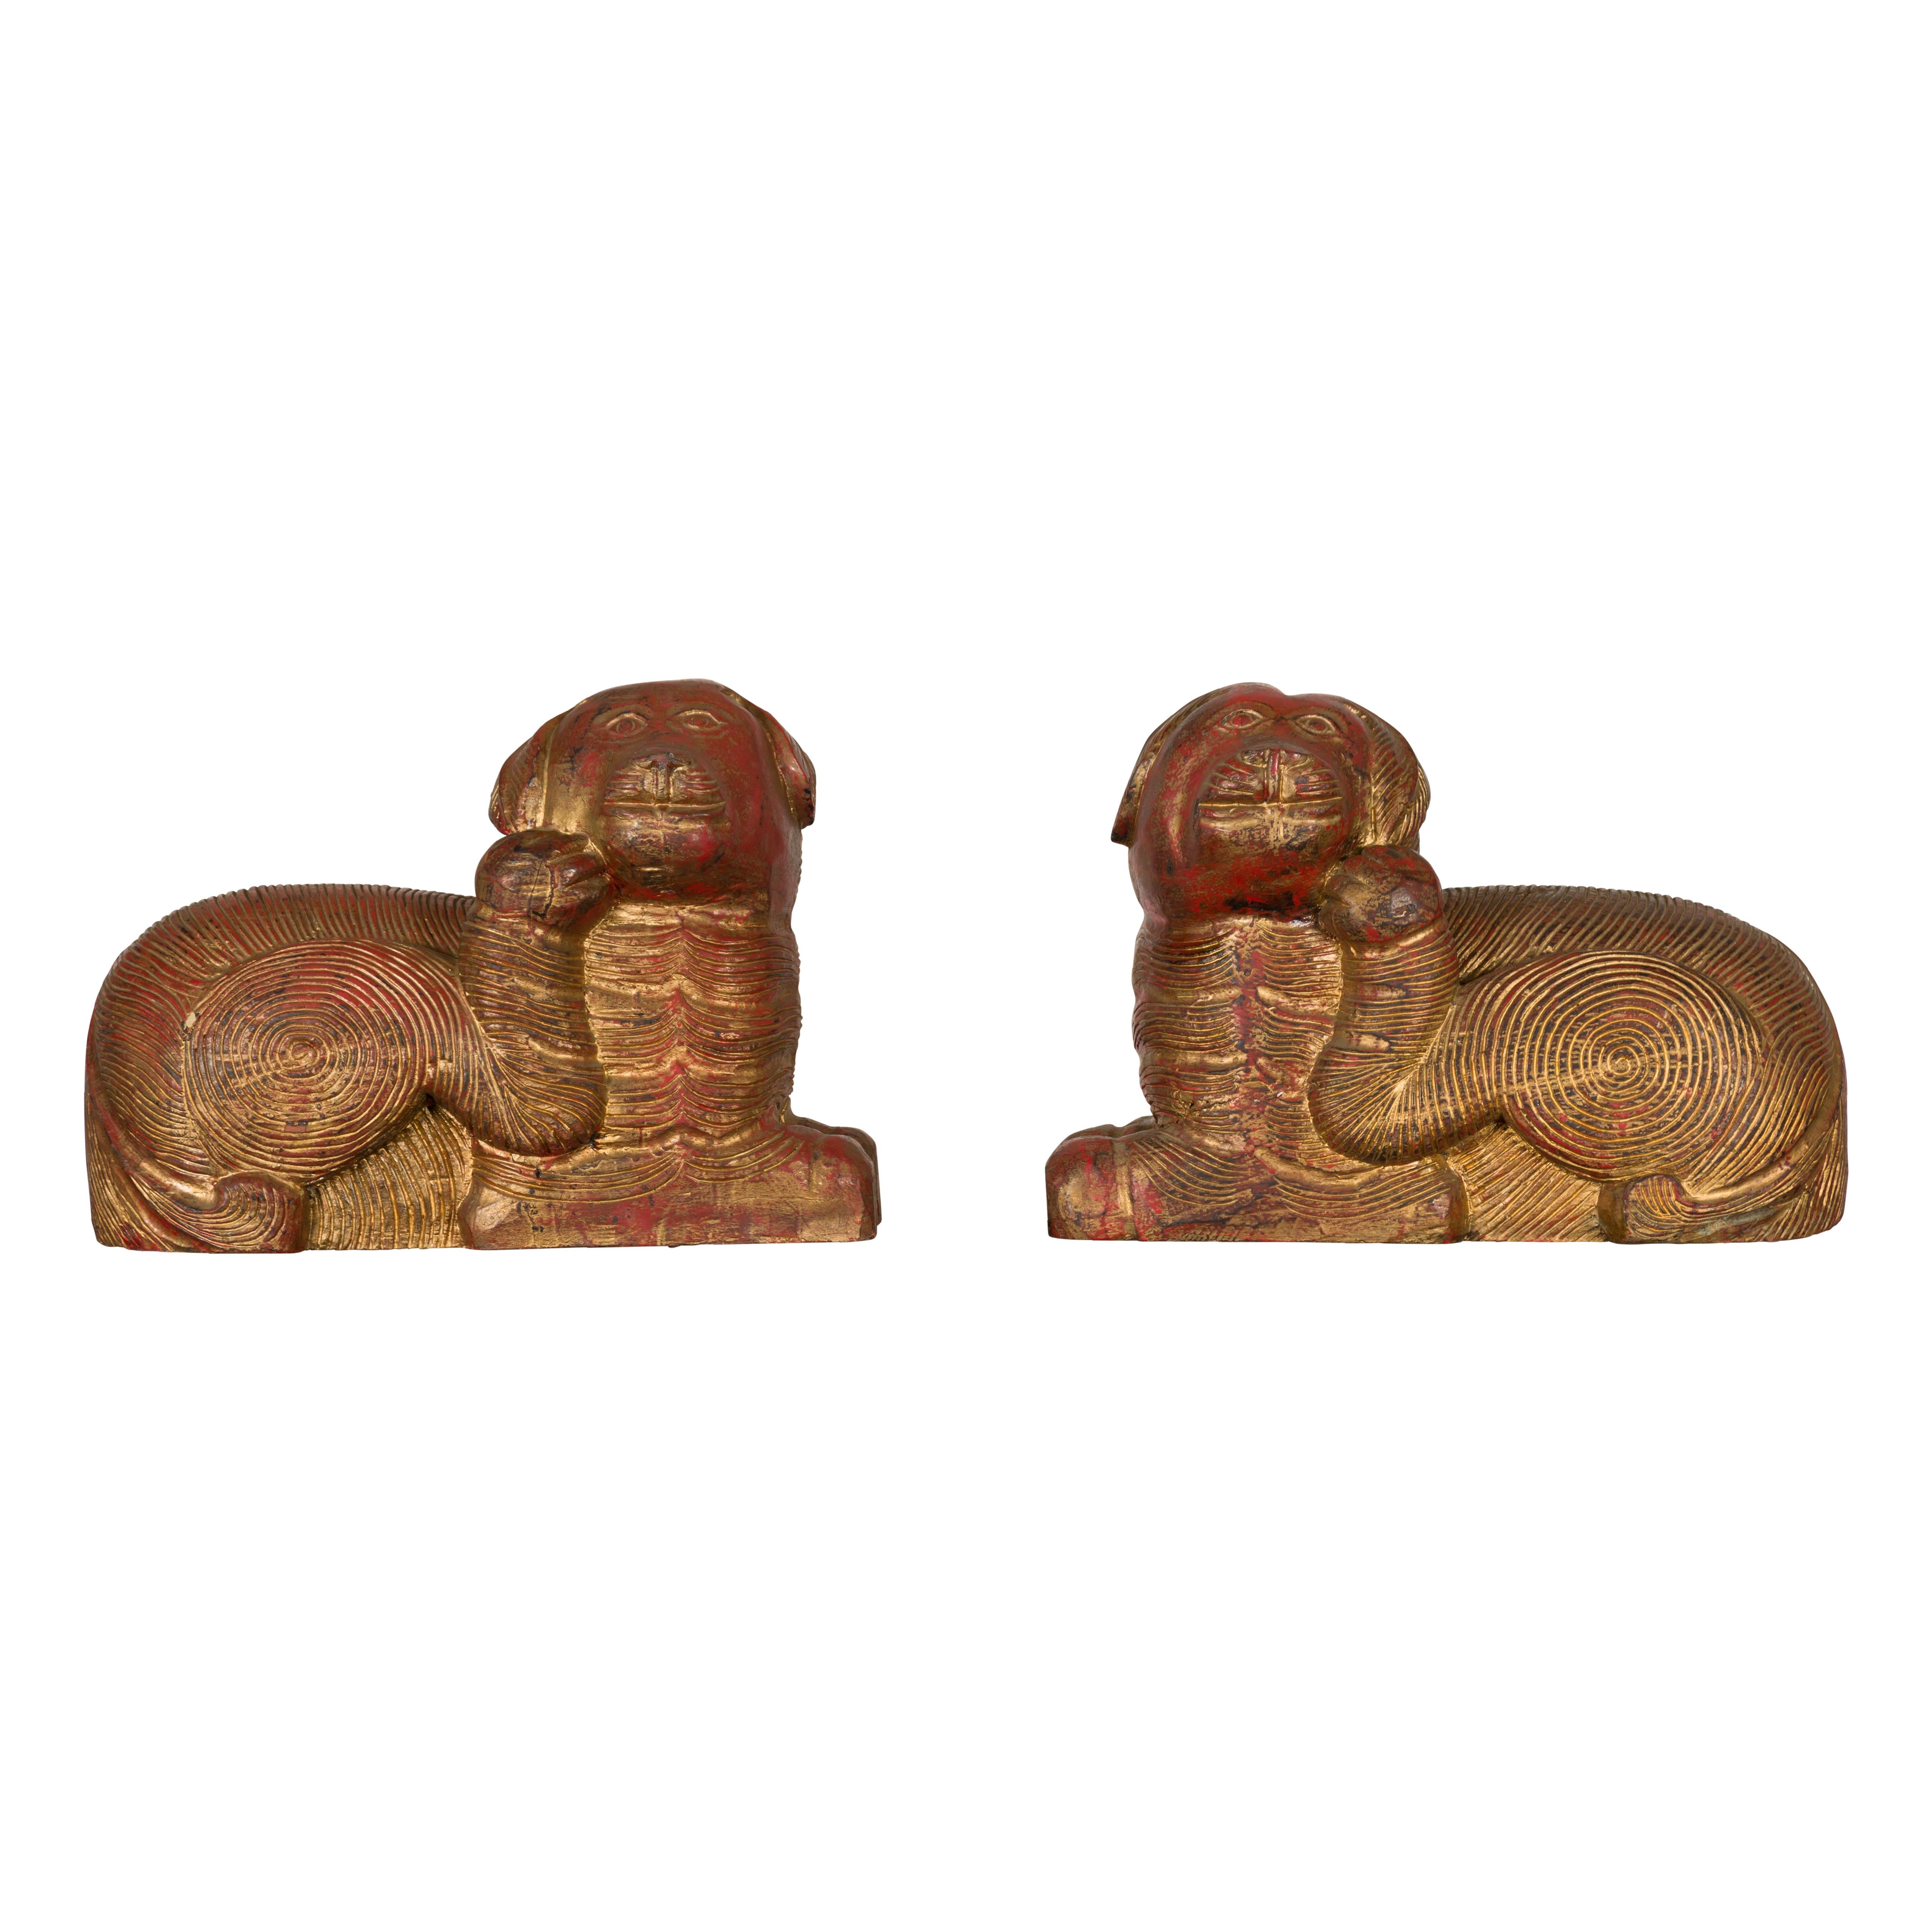 Vintage Pair of Pendant Thai Gilt Wood Mythological Creatures with Red Undertone For Sale